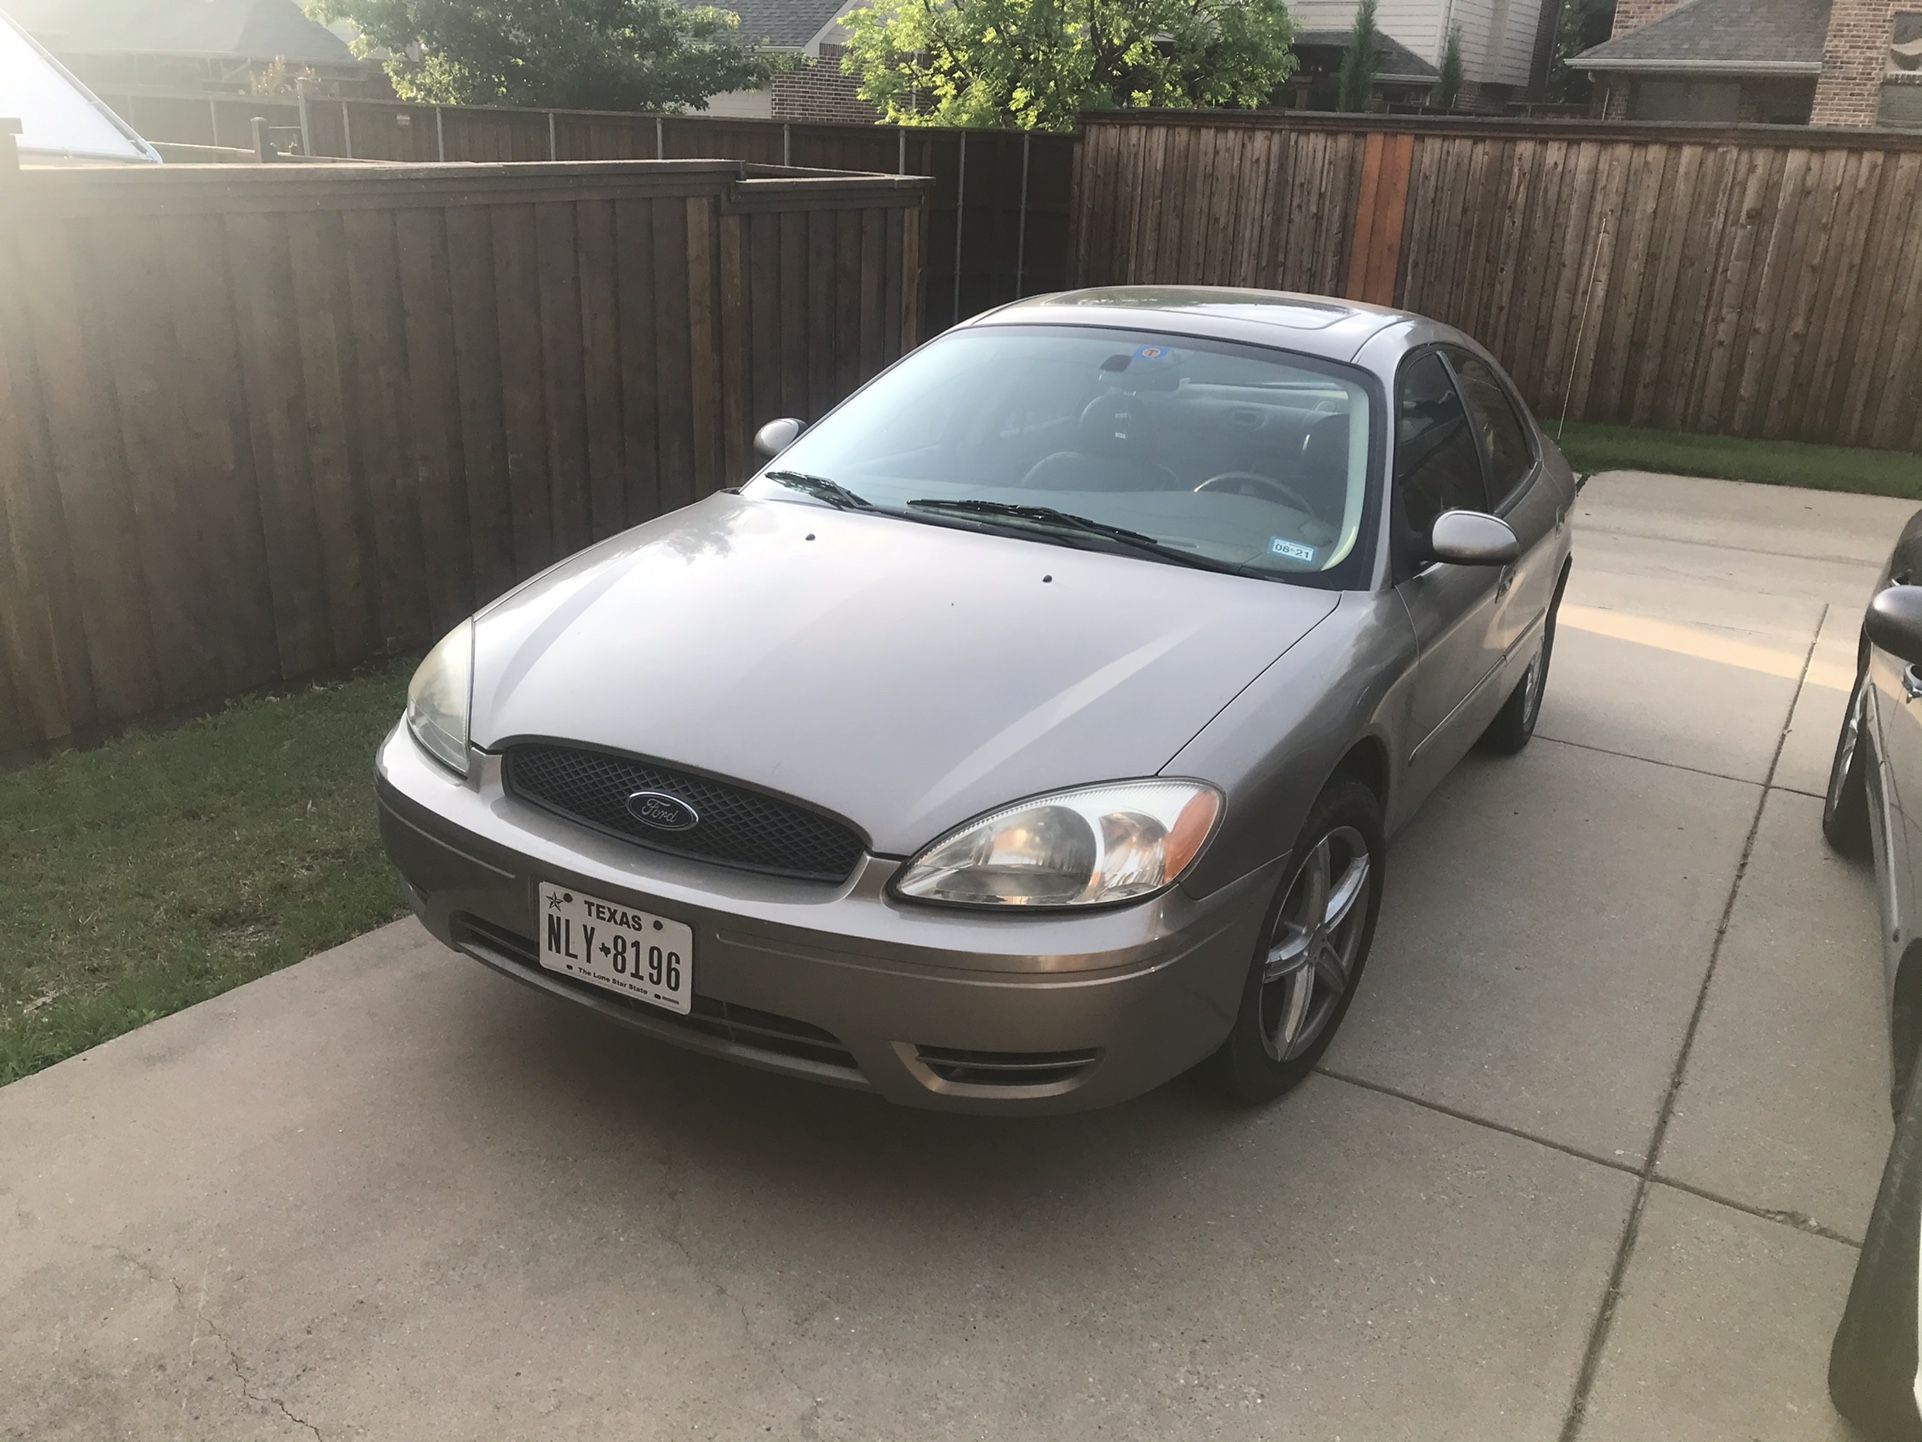 Photo 2007 Ford Taurus For 2700 Obo Negotiable In Good Condition 115000 Miles Clean Title Ac Heat Can Trade With A Truck But Money Talks Negotiable